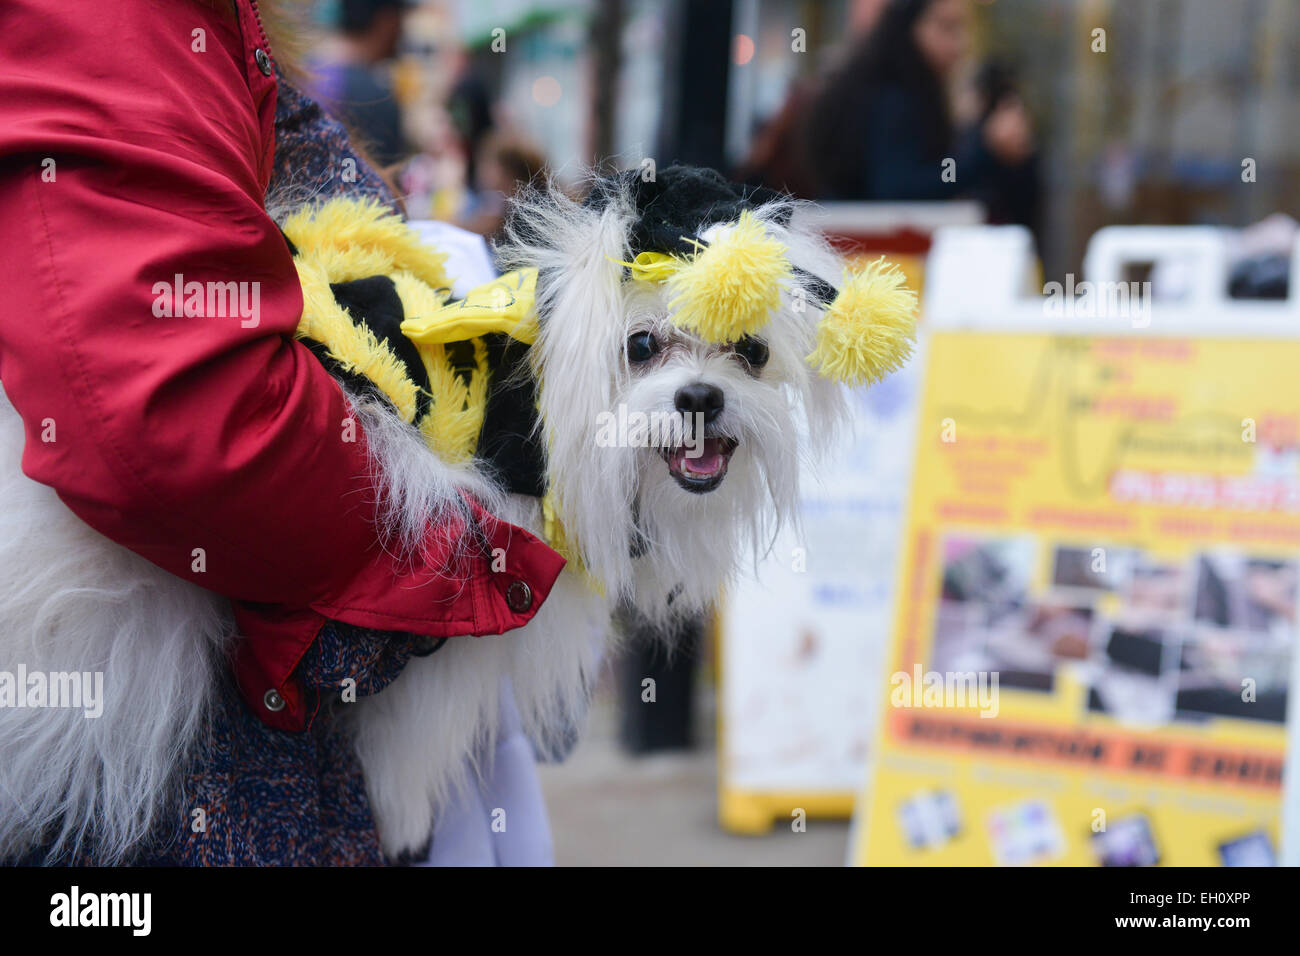 Dog dressed as a bee during Halloween 2013 being held by its owner in the streets of Newark, New Jersey USA. Stock Photo